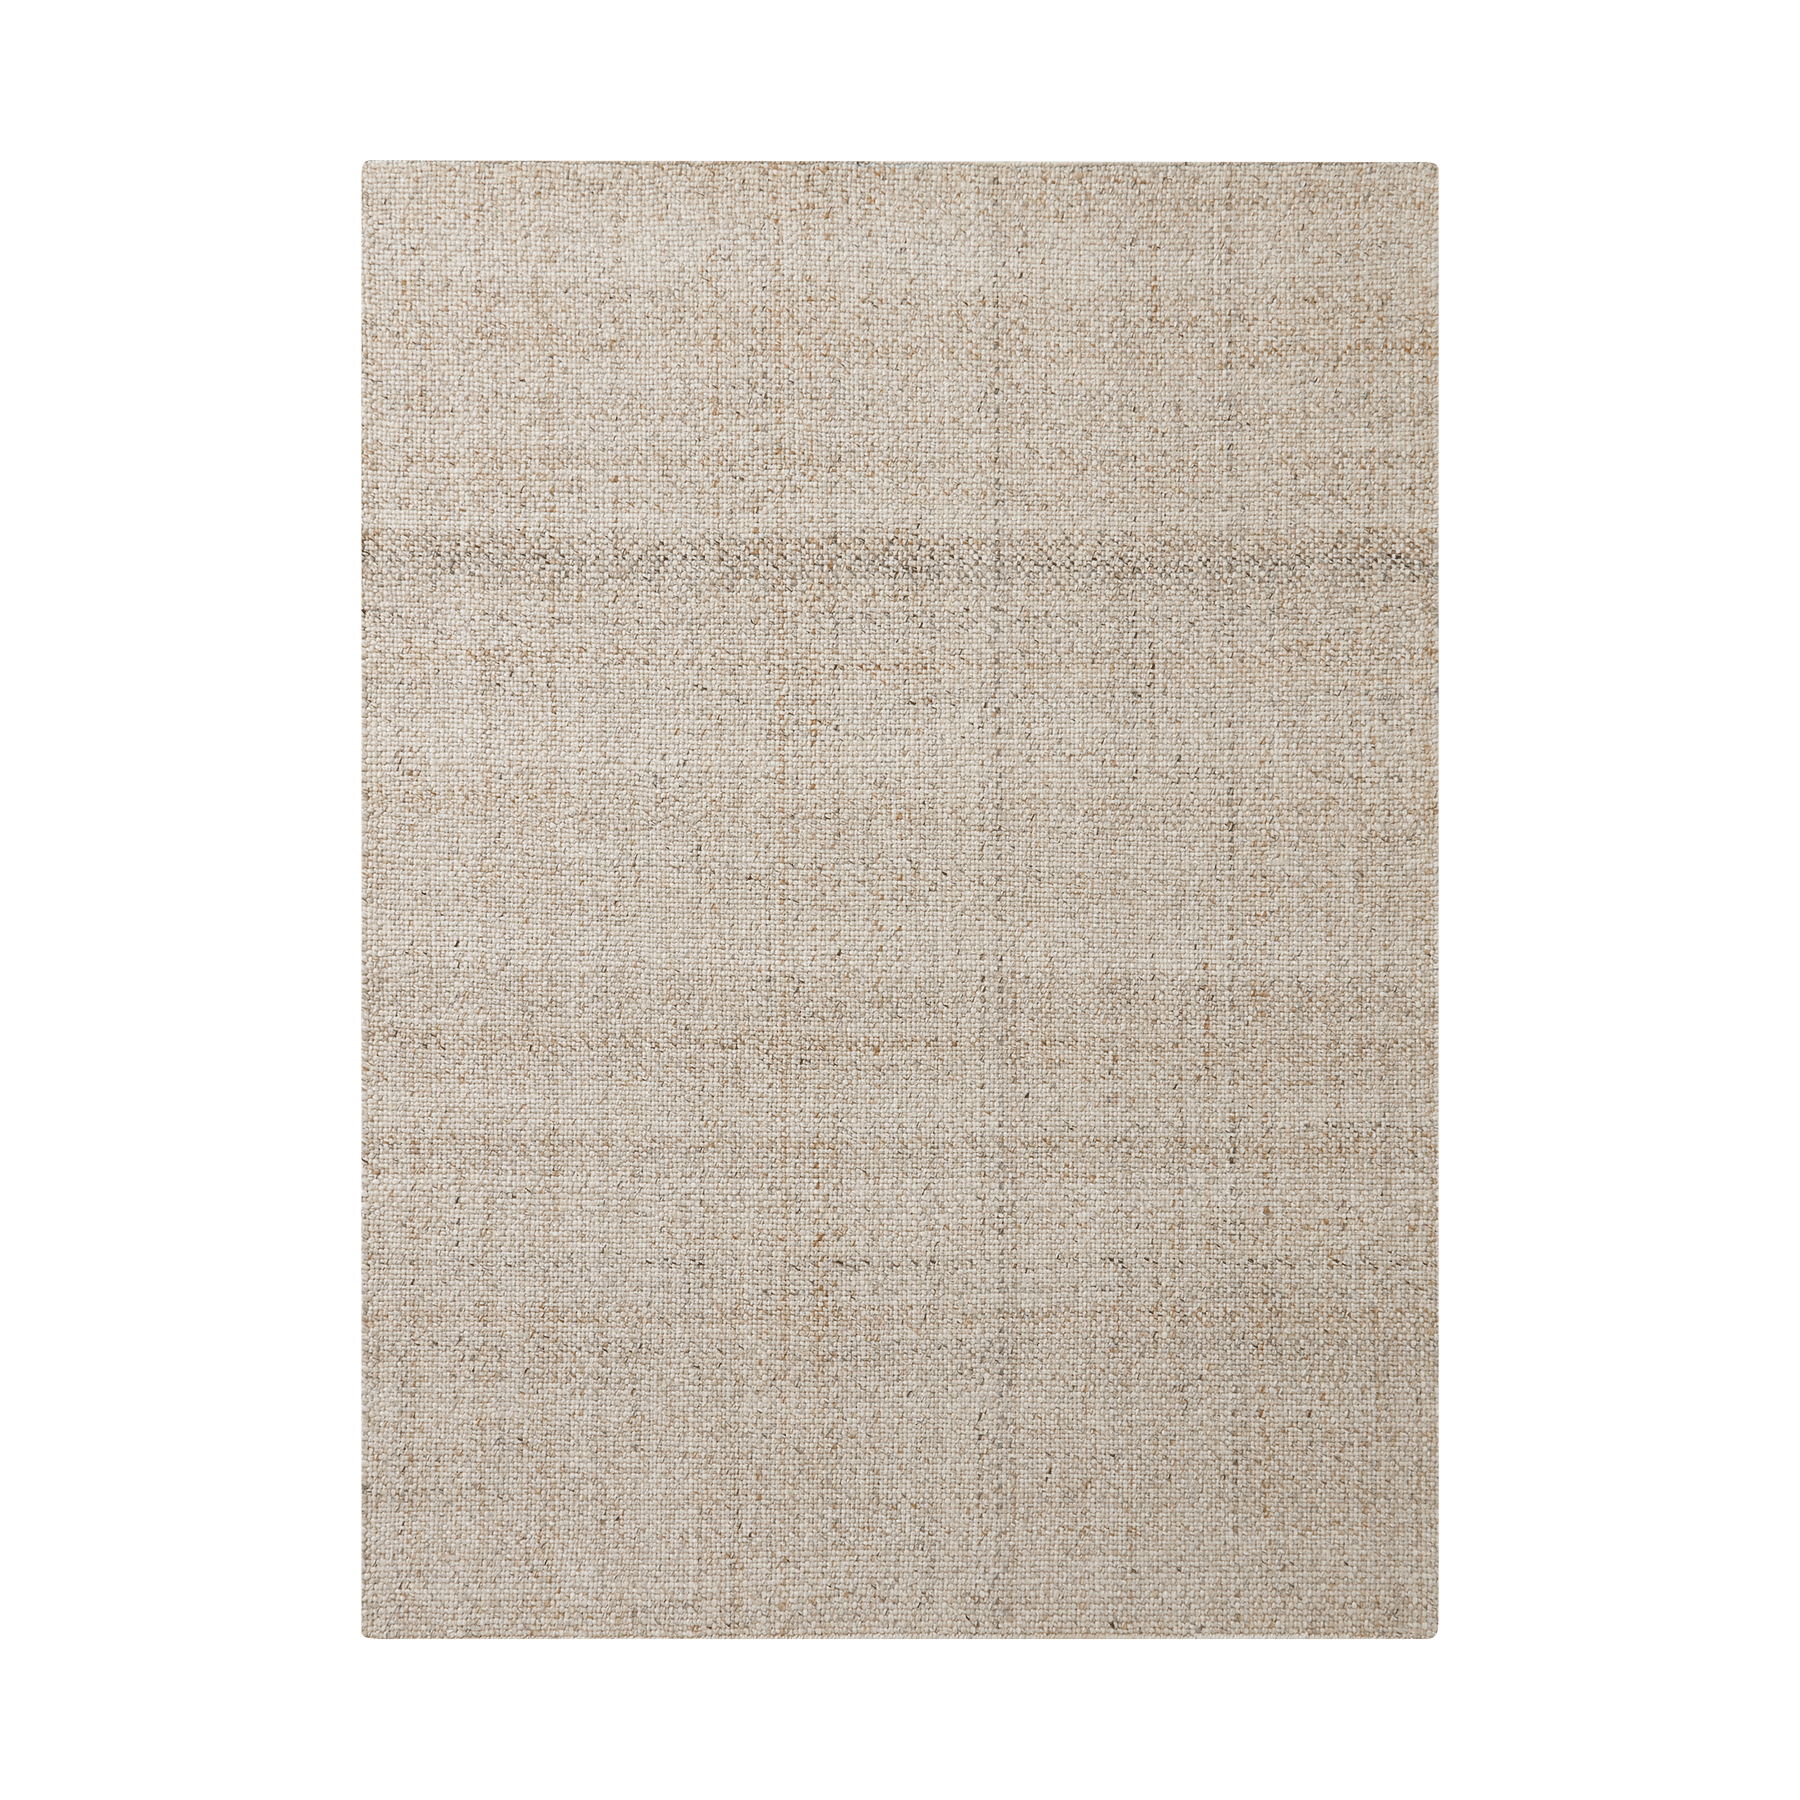 H3 rug in Blond